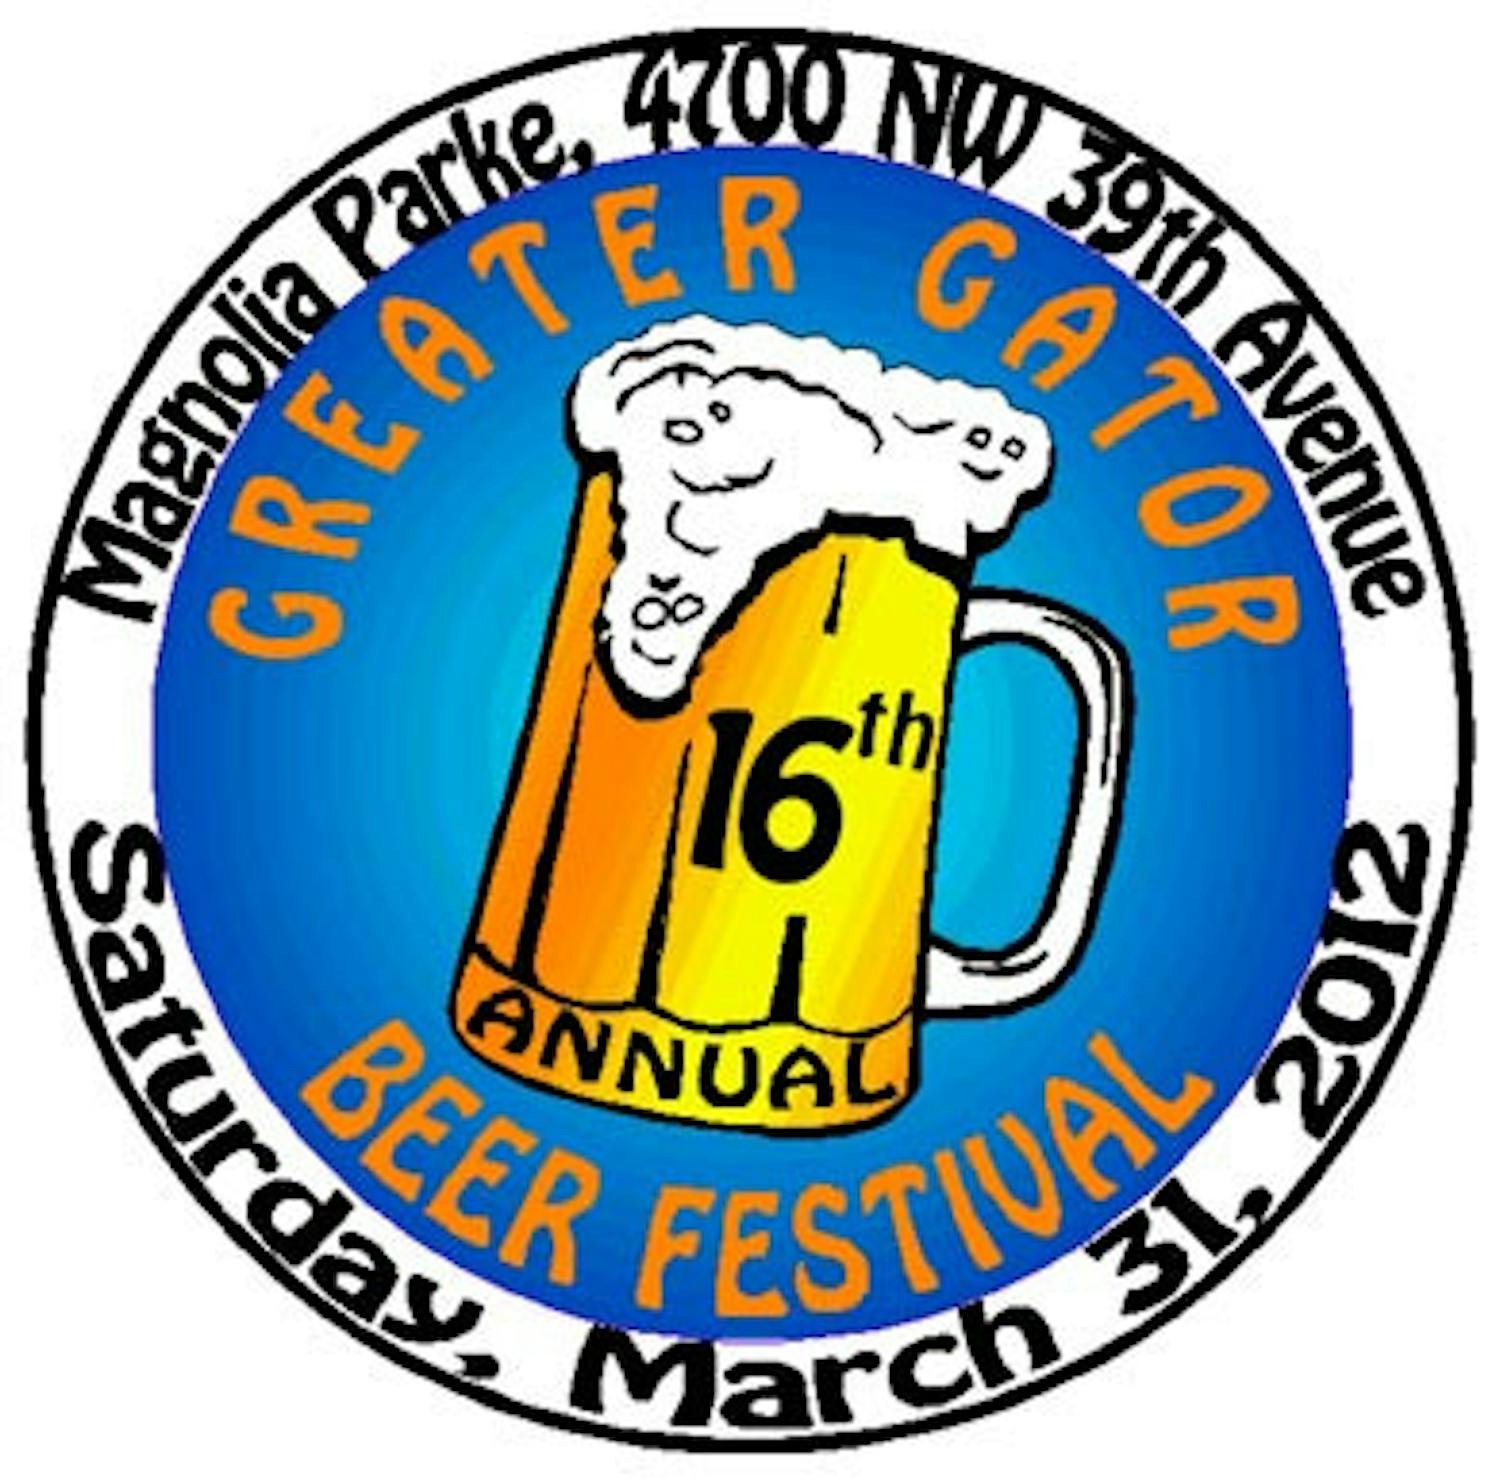 The Greater Gator Beer Festival is taking over Magnolia Park on Saturday and will bring an expected crowd of more than 1,000 brewers and beer enthusiasts together to celebrate great beer.